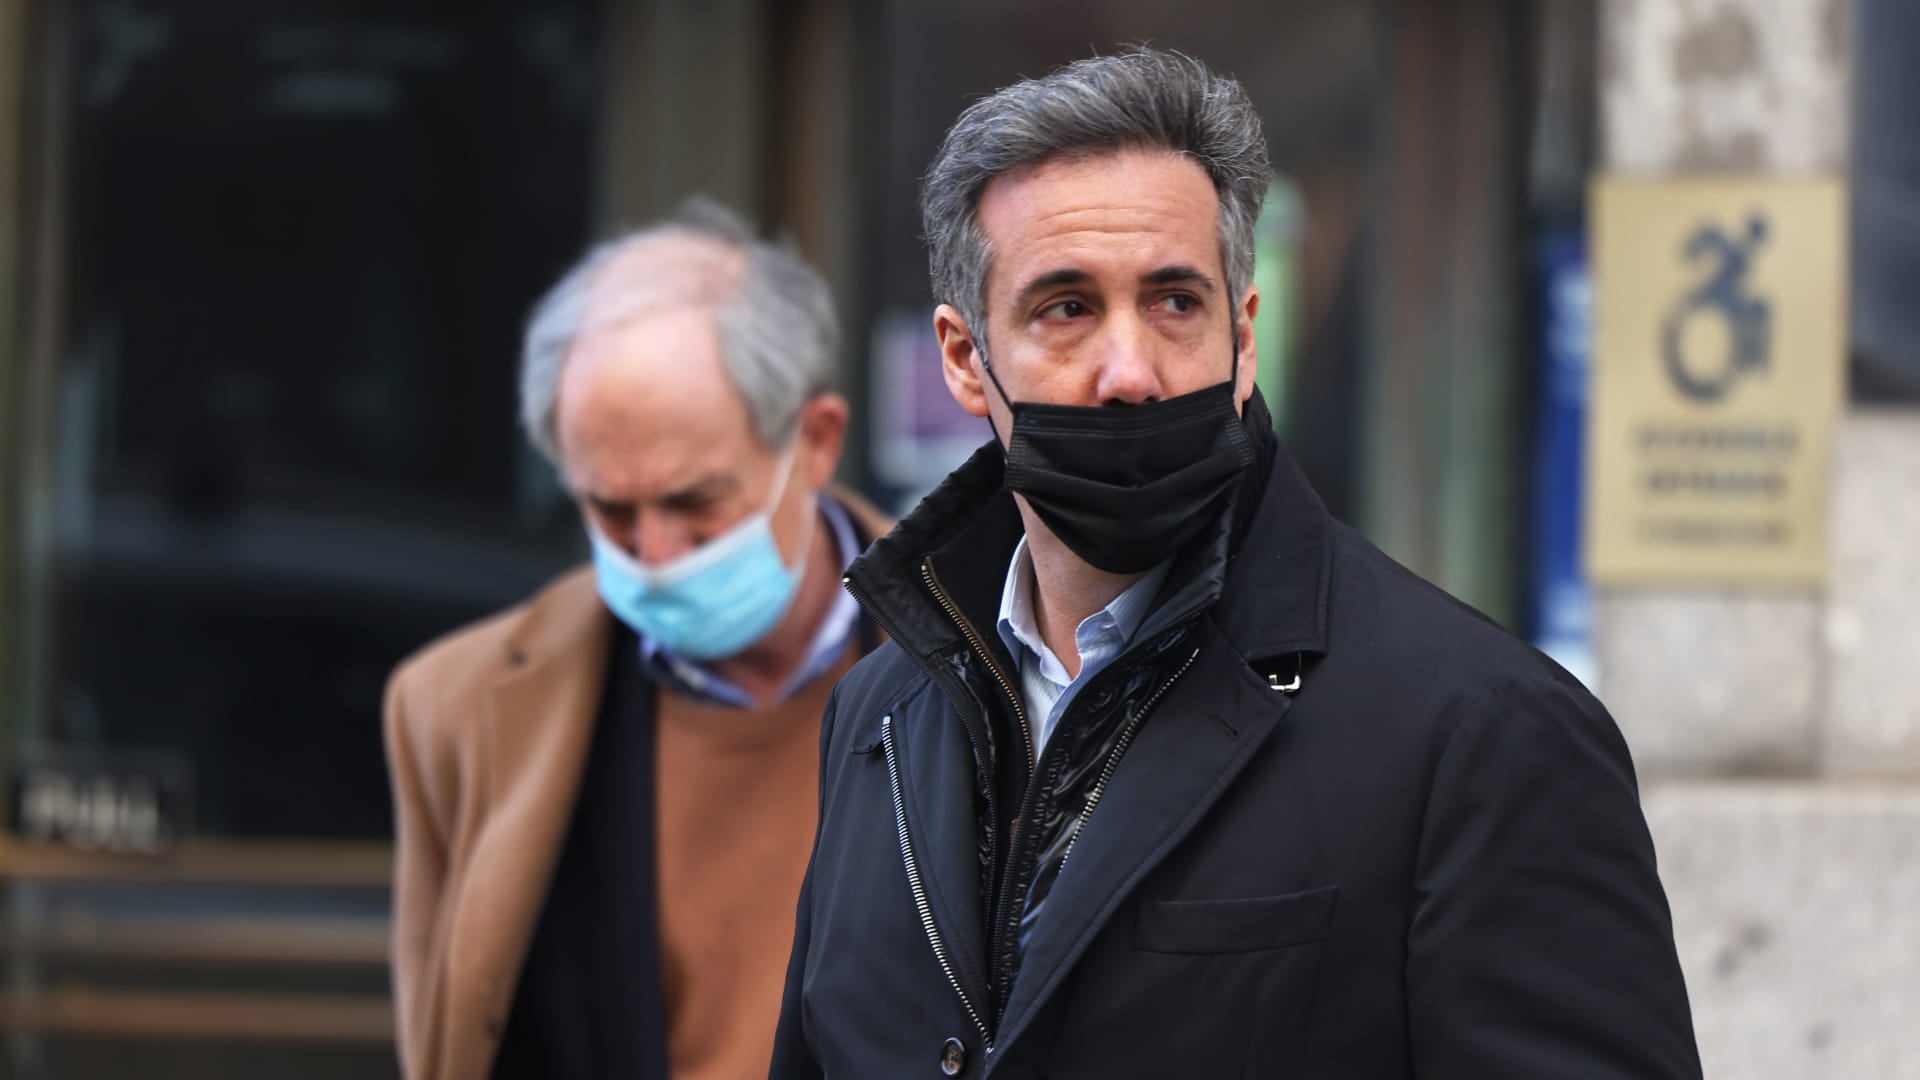 Michael Cohen exits the Manhattan district attorney’s office on March 19, 2021 in New York City.